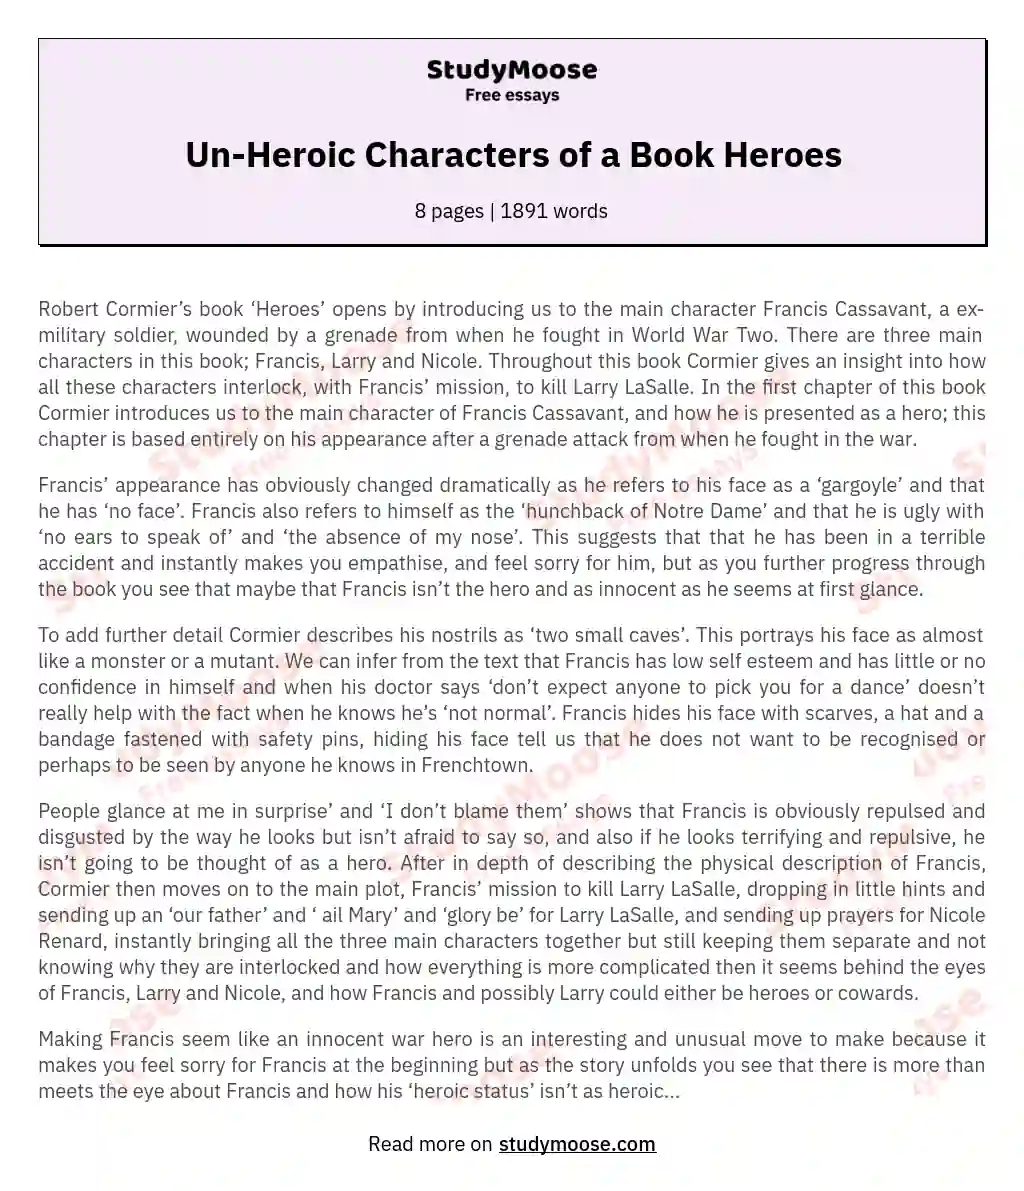 Un-Heroic Characters of a Book Heroes essay